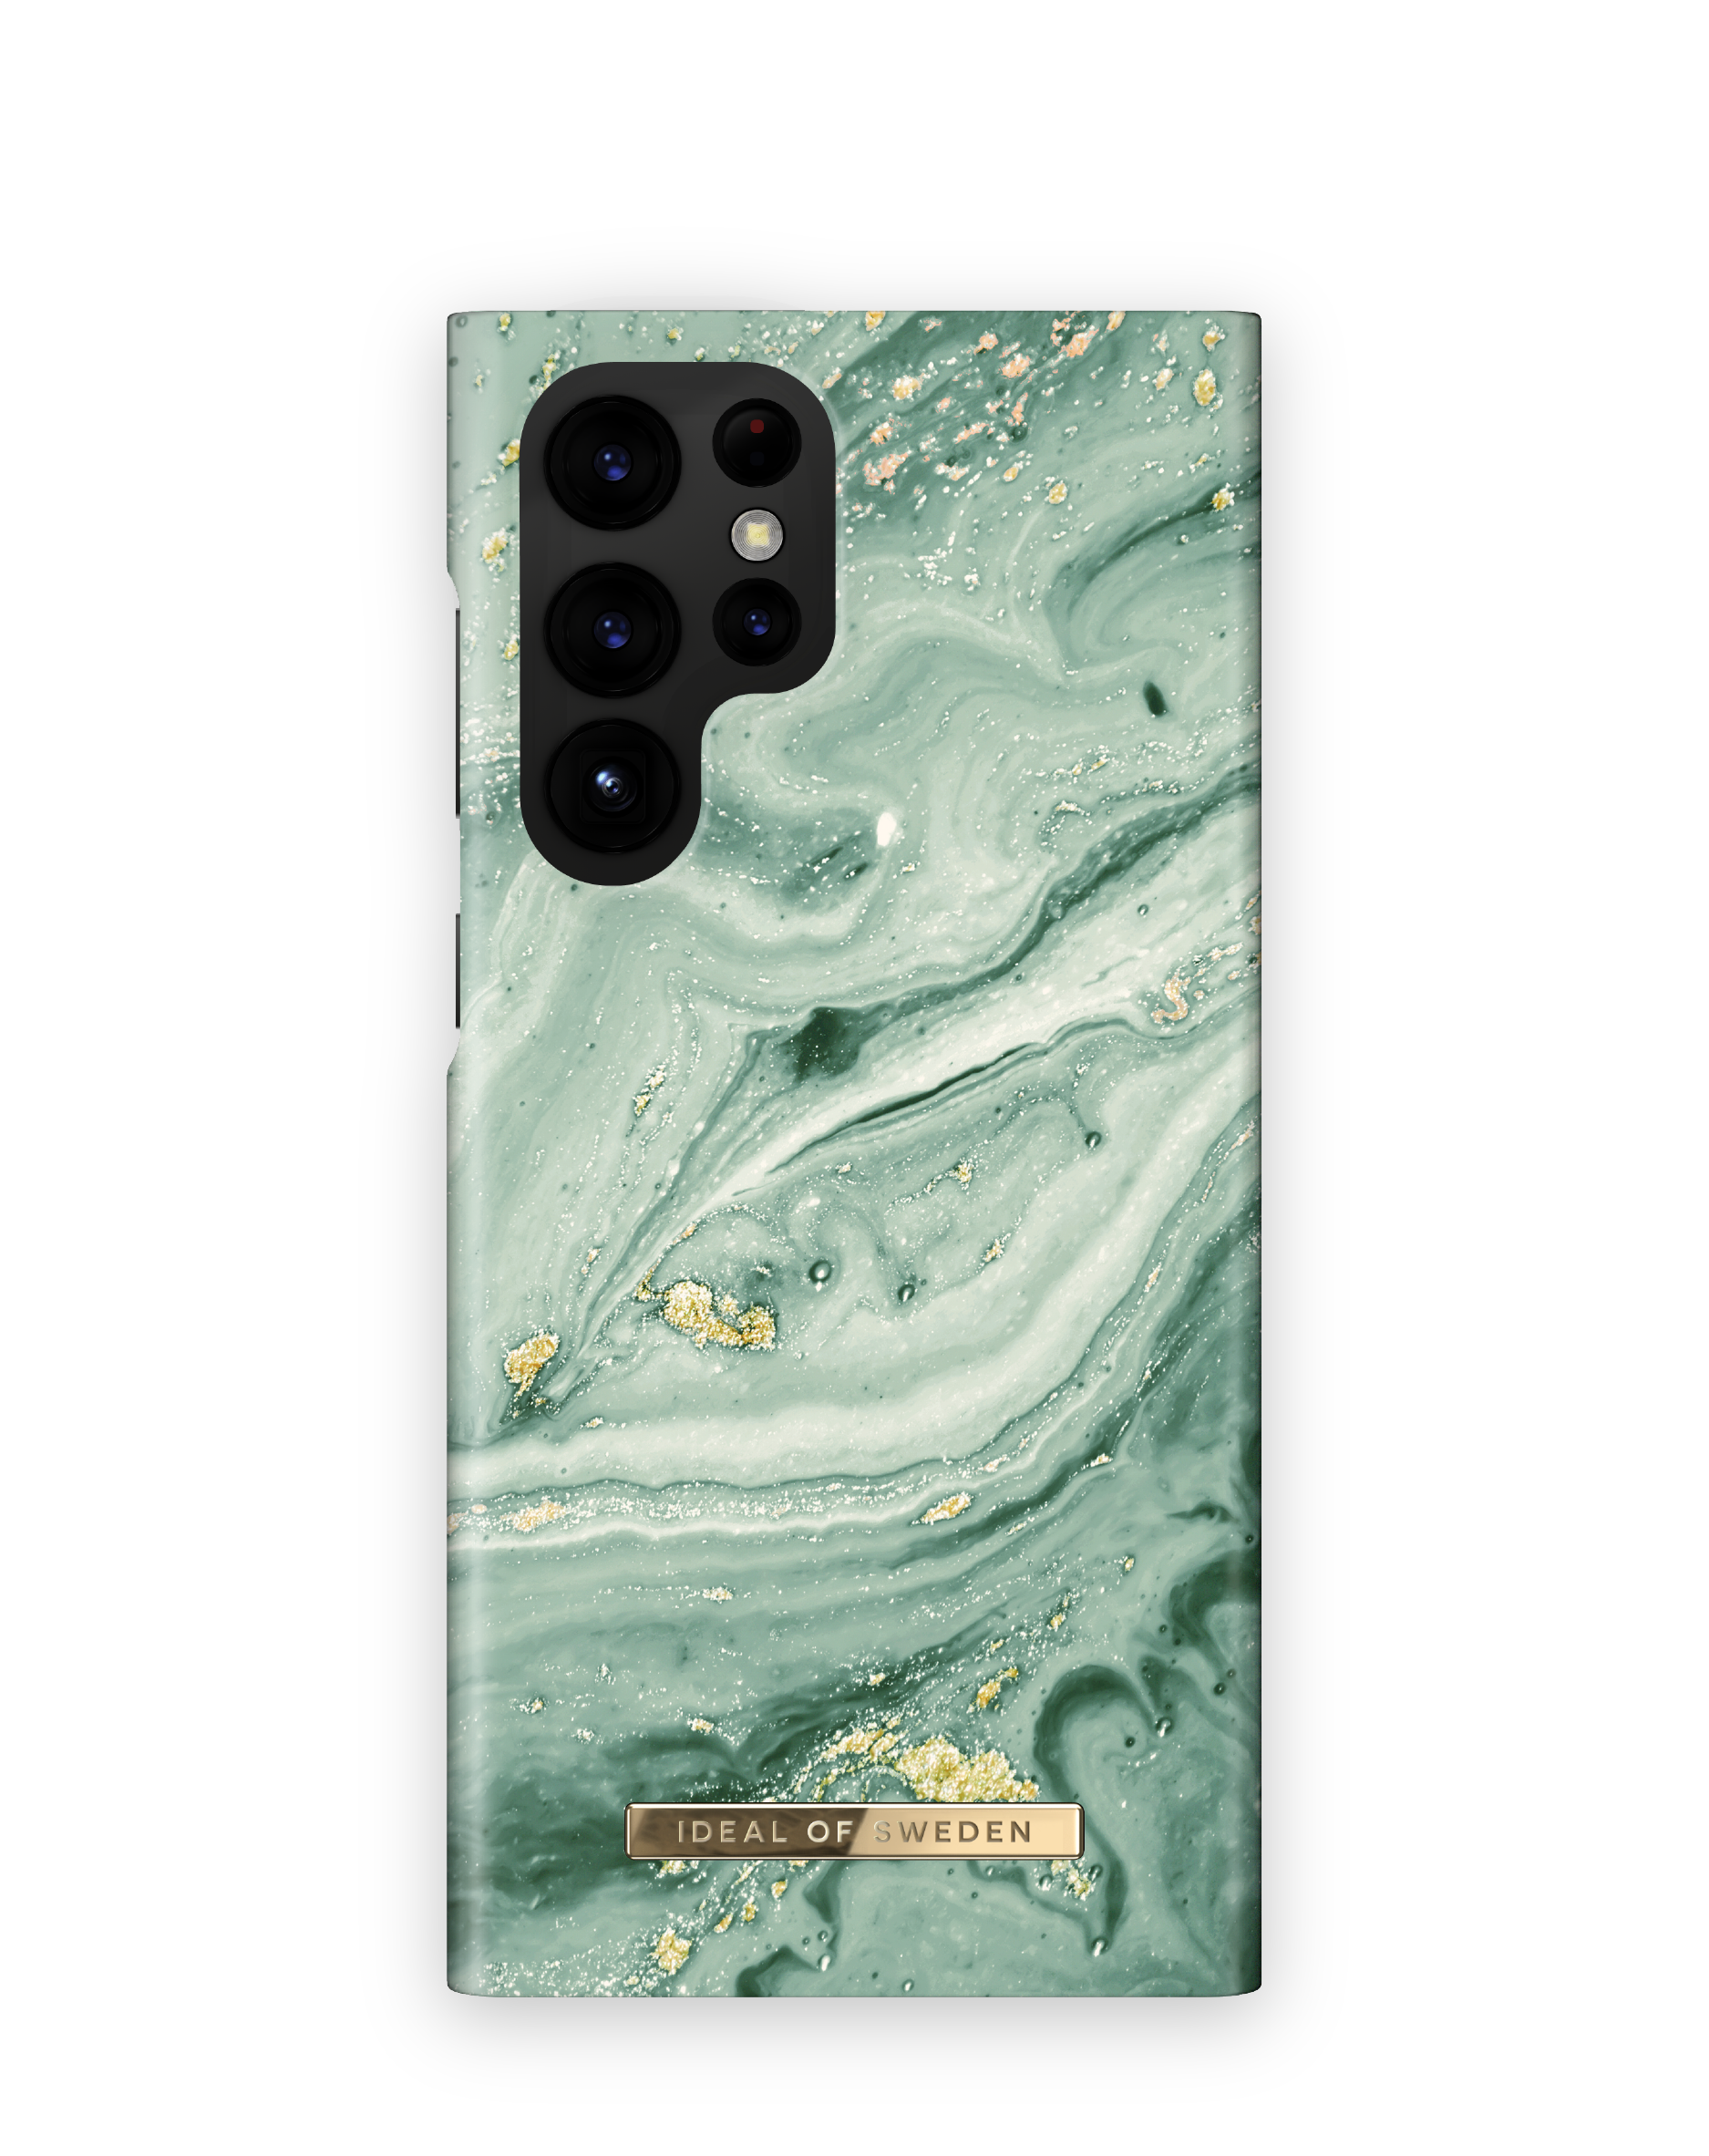 Samsung, IDFCSS21-S22U-258, OF S22 SWEDEN IDEAL Mint Marble Backcover, Galaxy Swirl Ultra,